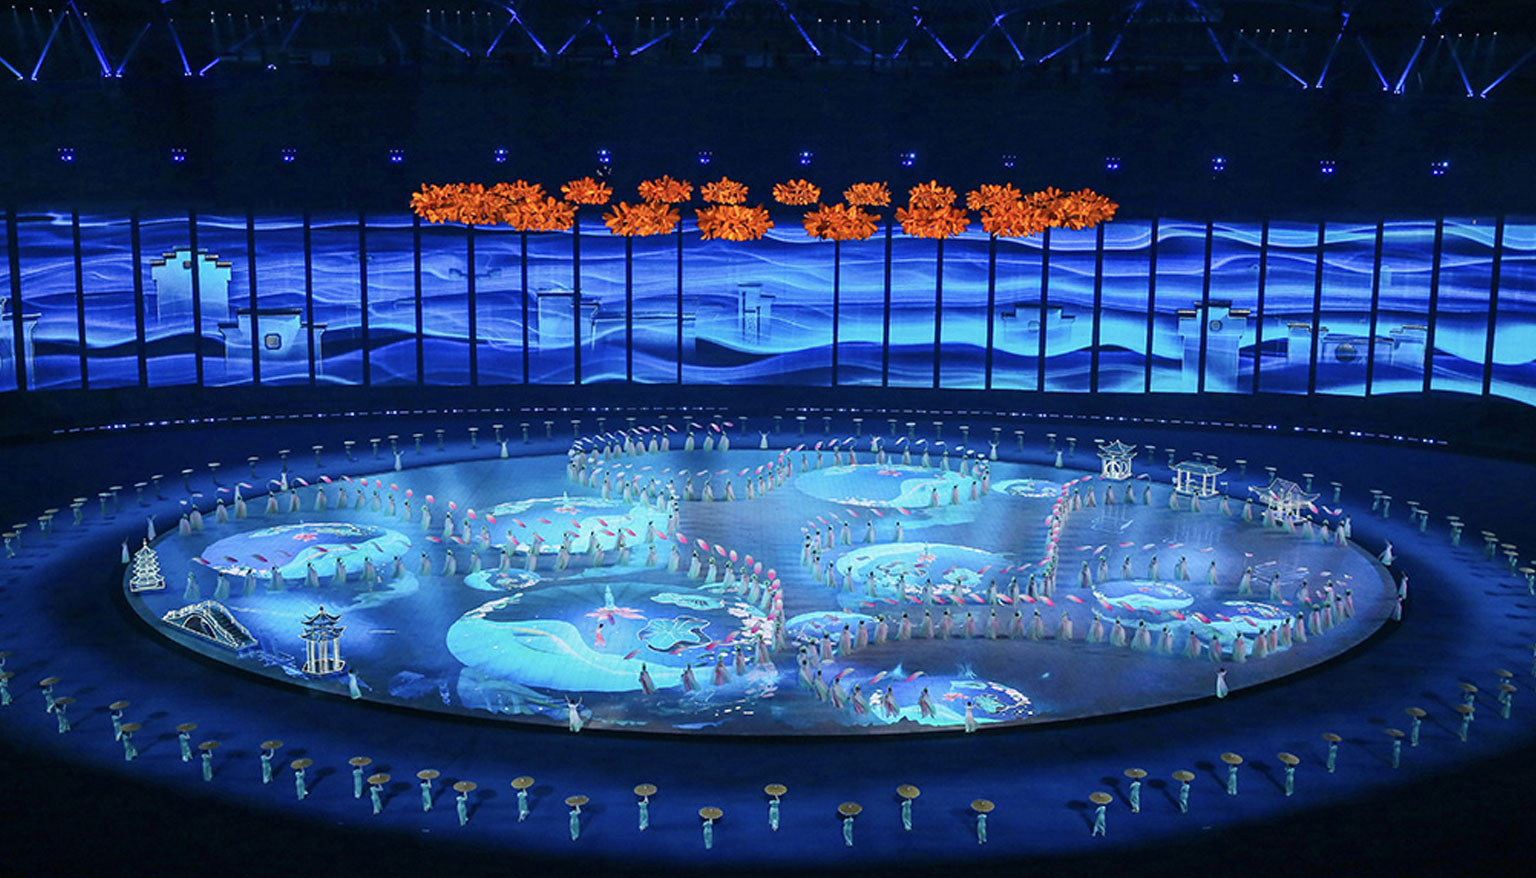 Luminatii floor screen screen shines in the closing ceremony of the Asian Para Games, interpretation of shocking visual effects with technology